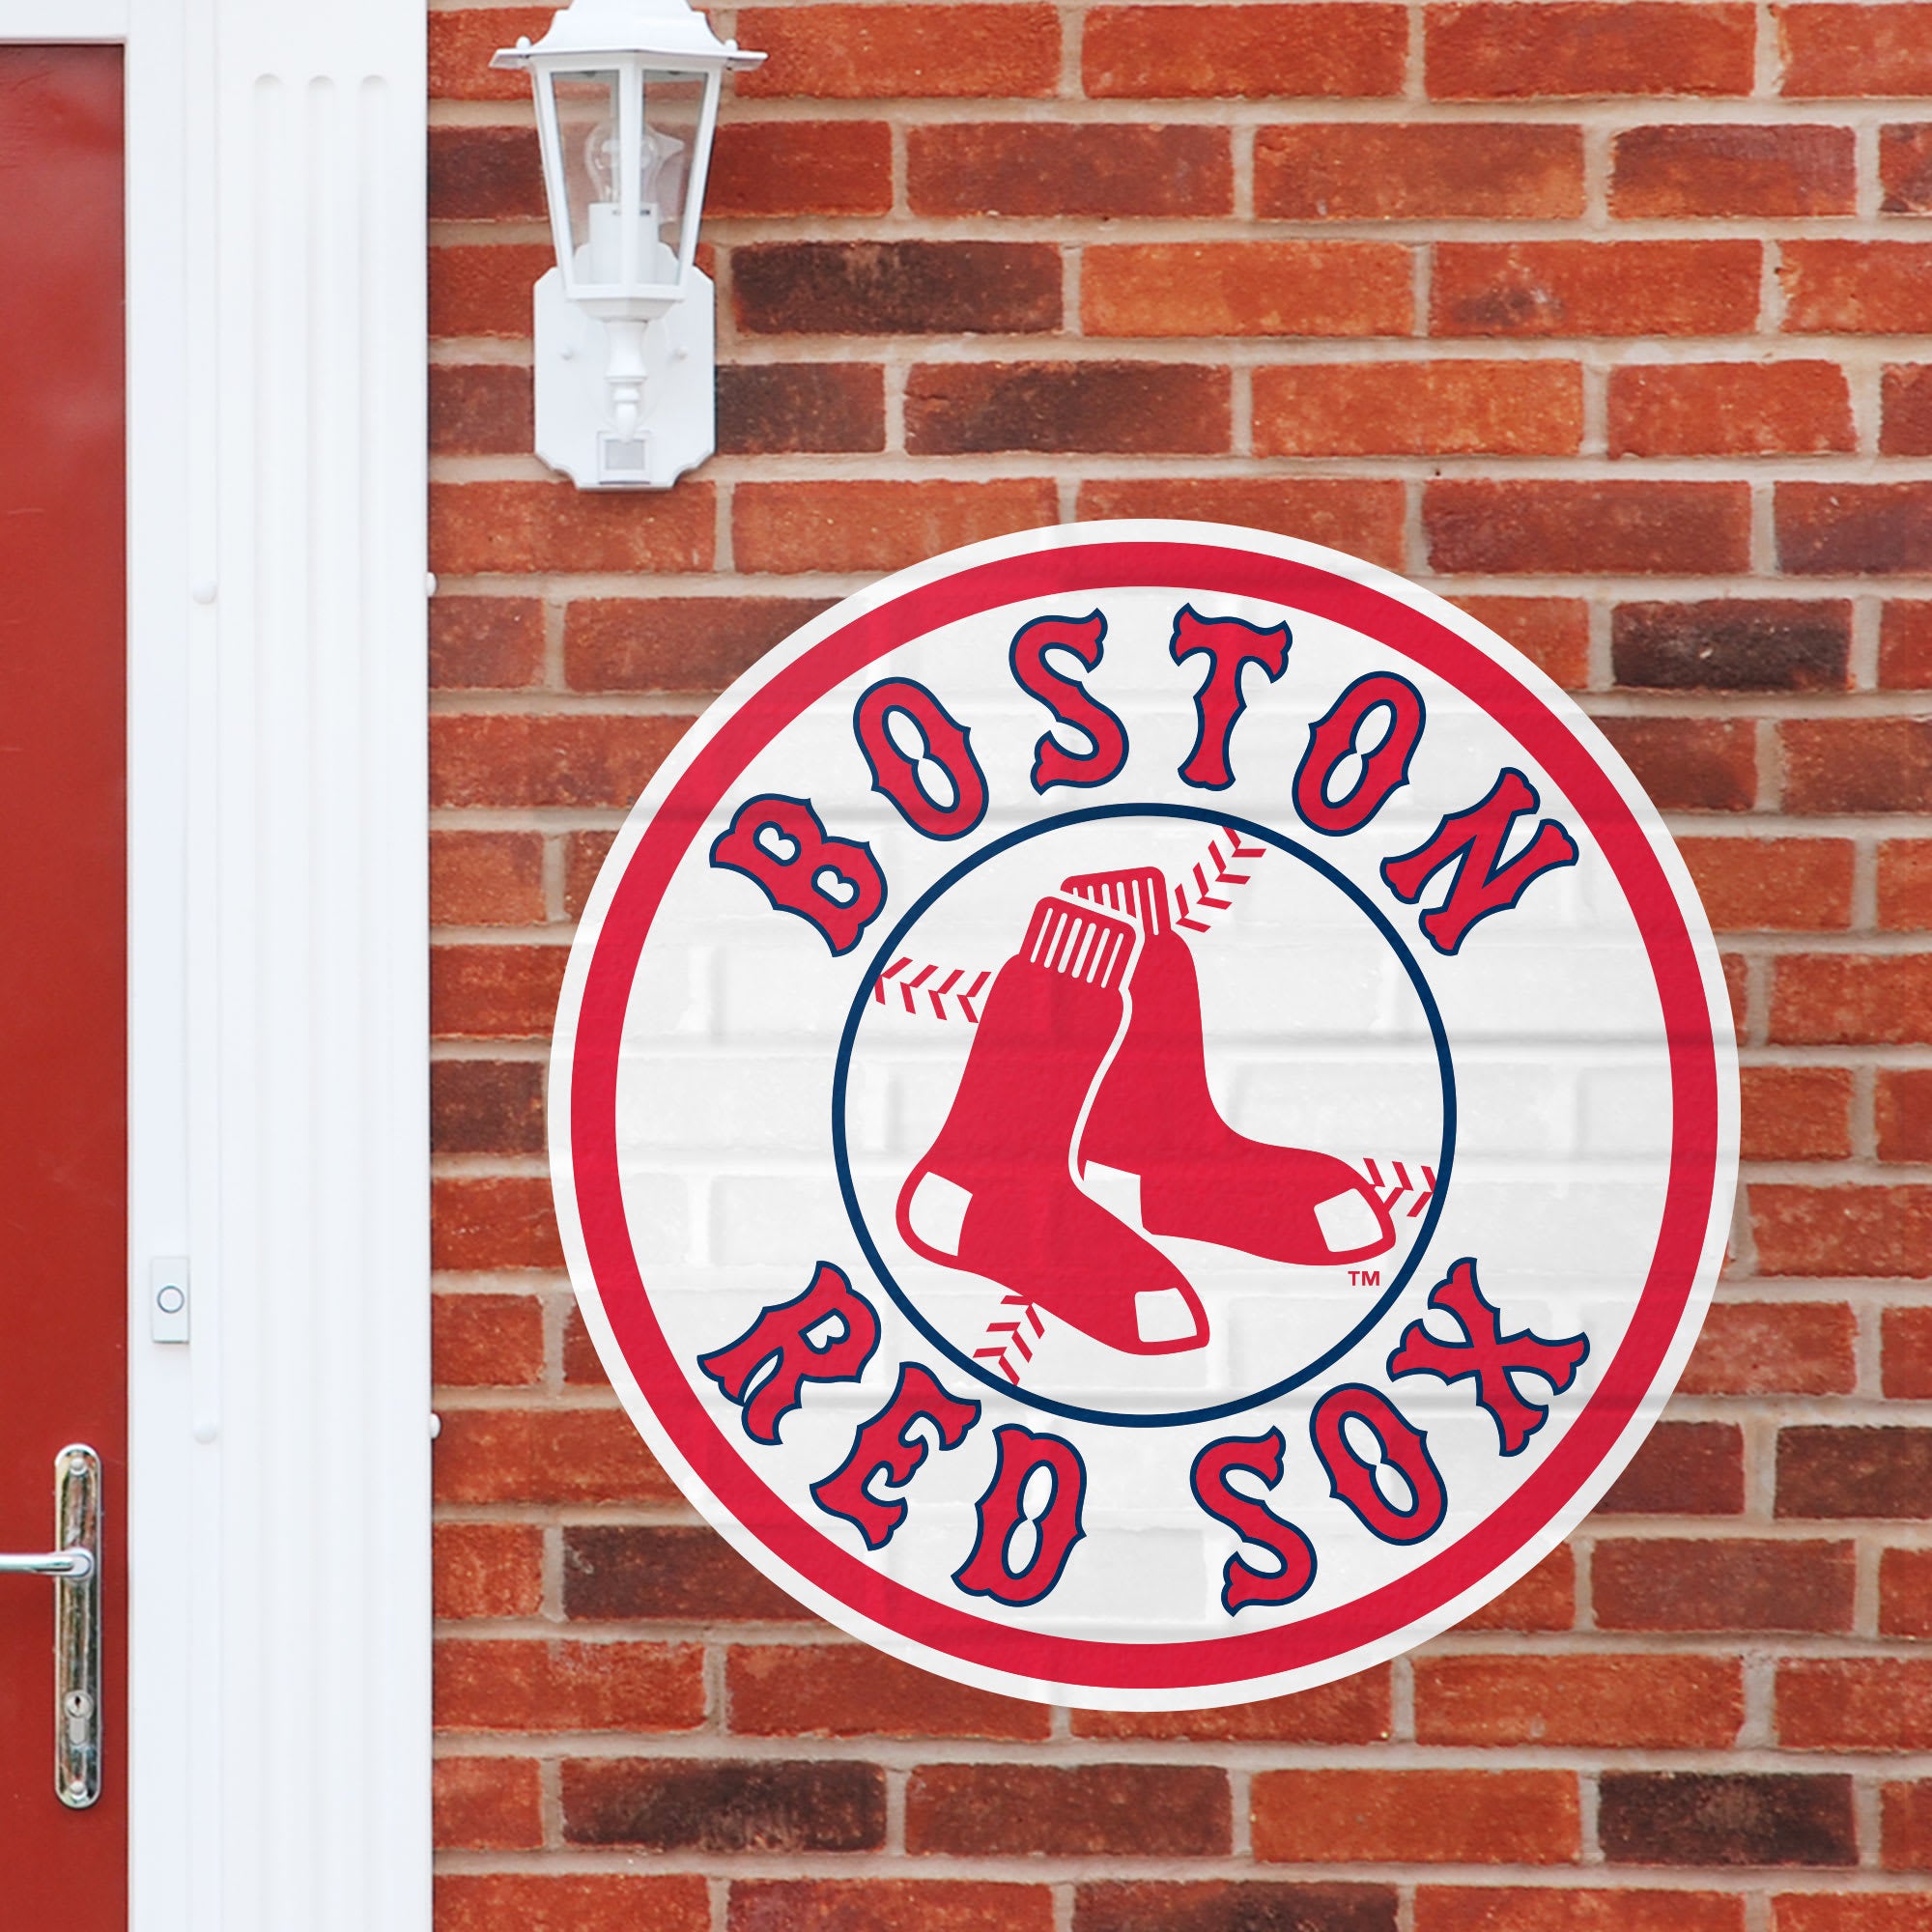 Boston Red Sox: Logo - Officially Licensed MLB Outdoor Graphic Giant Logo (30"W x 30"H) by Fathead | Wood/Aluminum